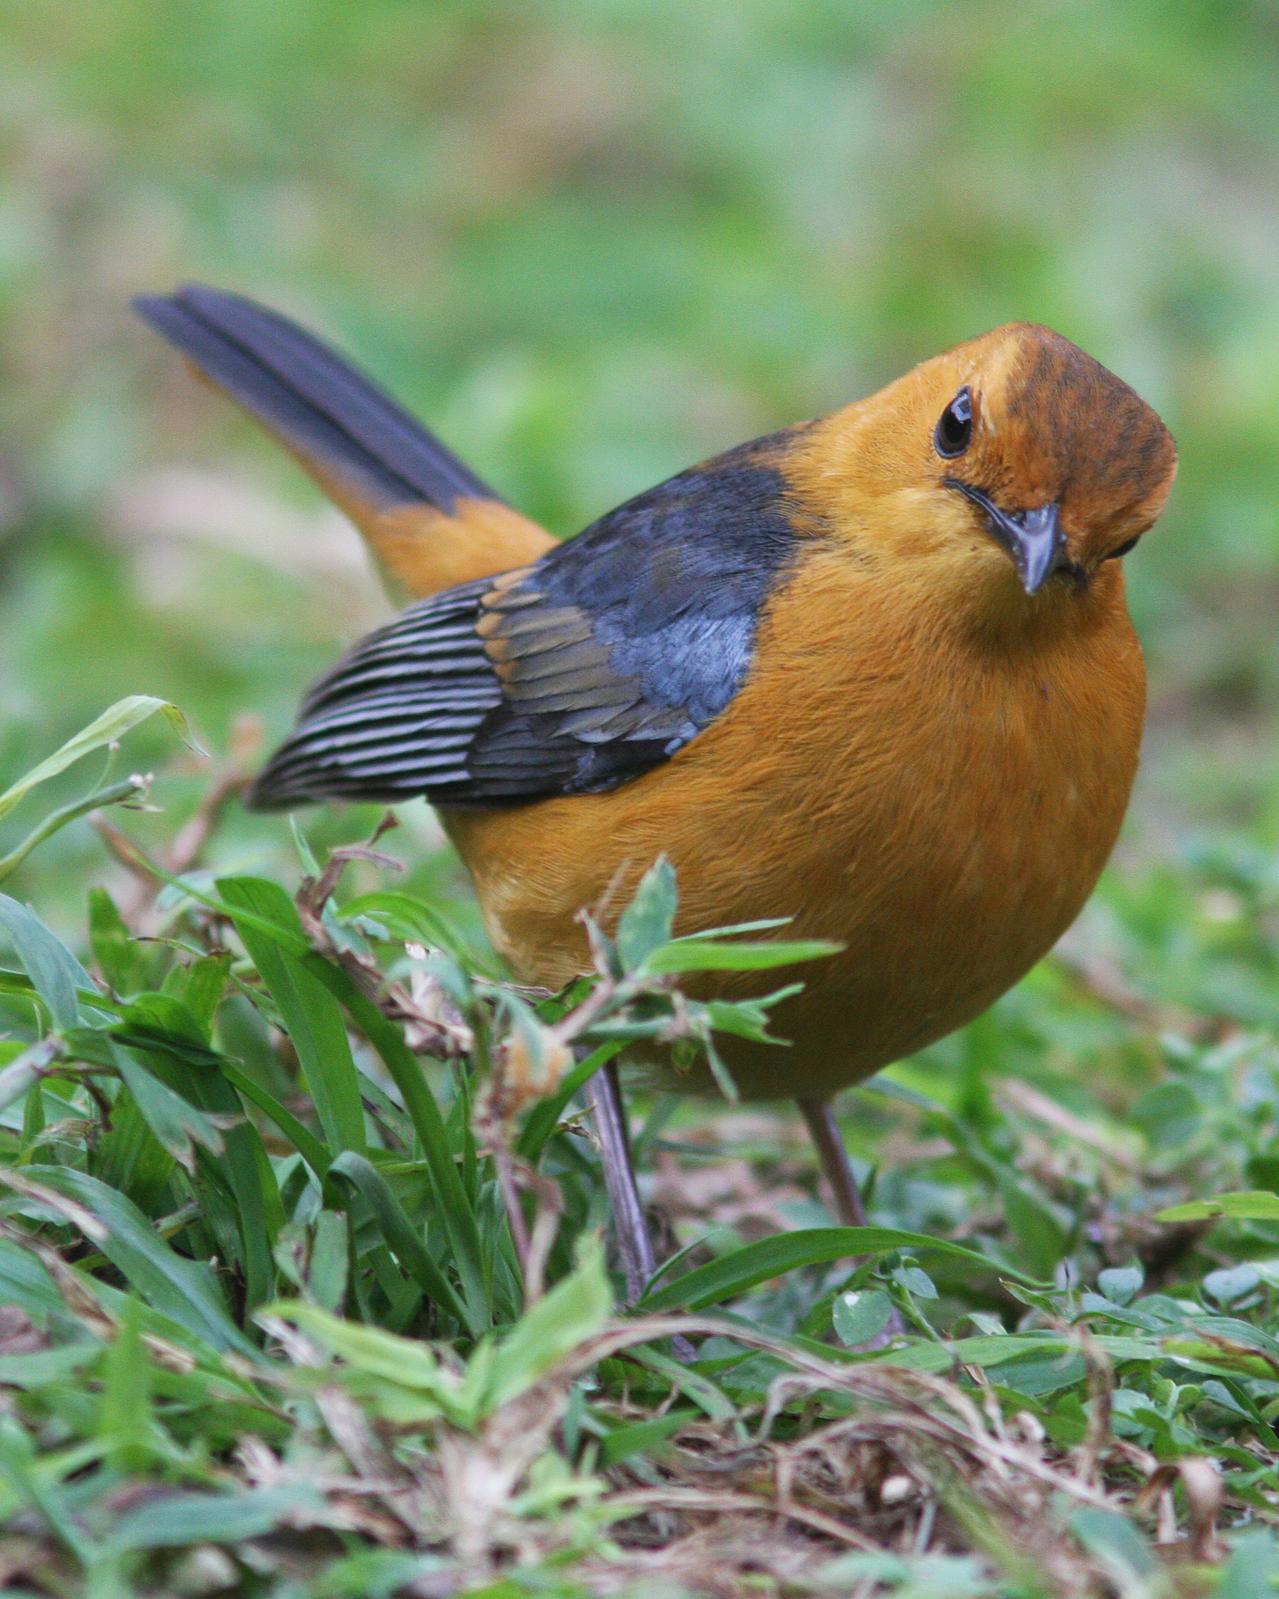 Red-capped Robin-Chat Photo by Henk Baptist